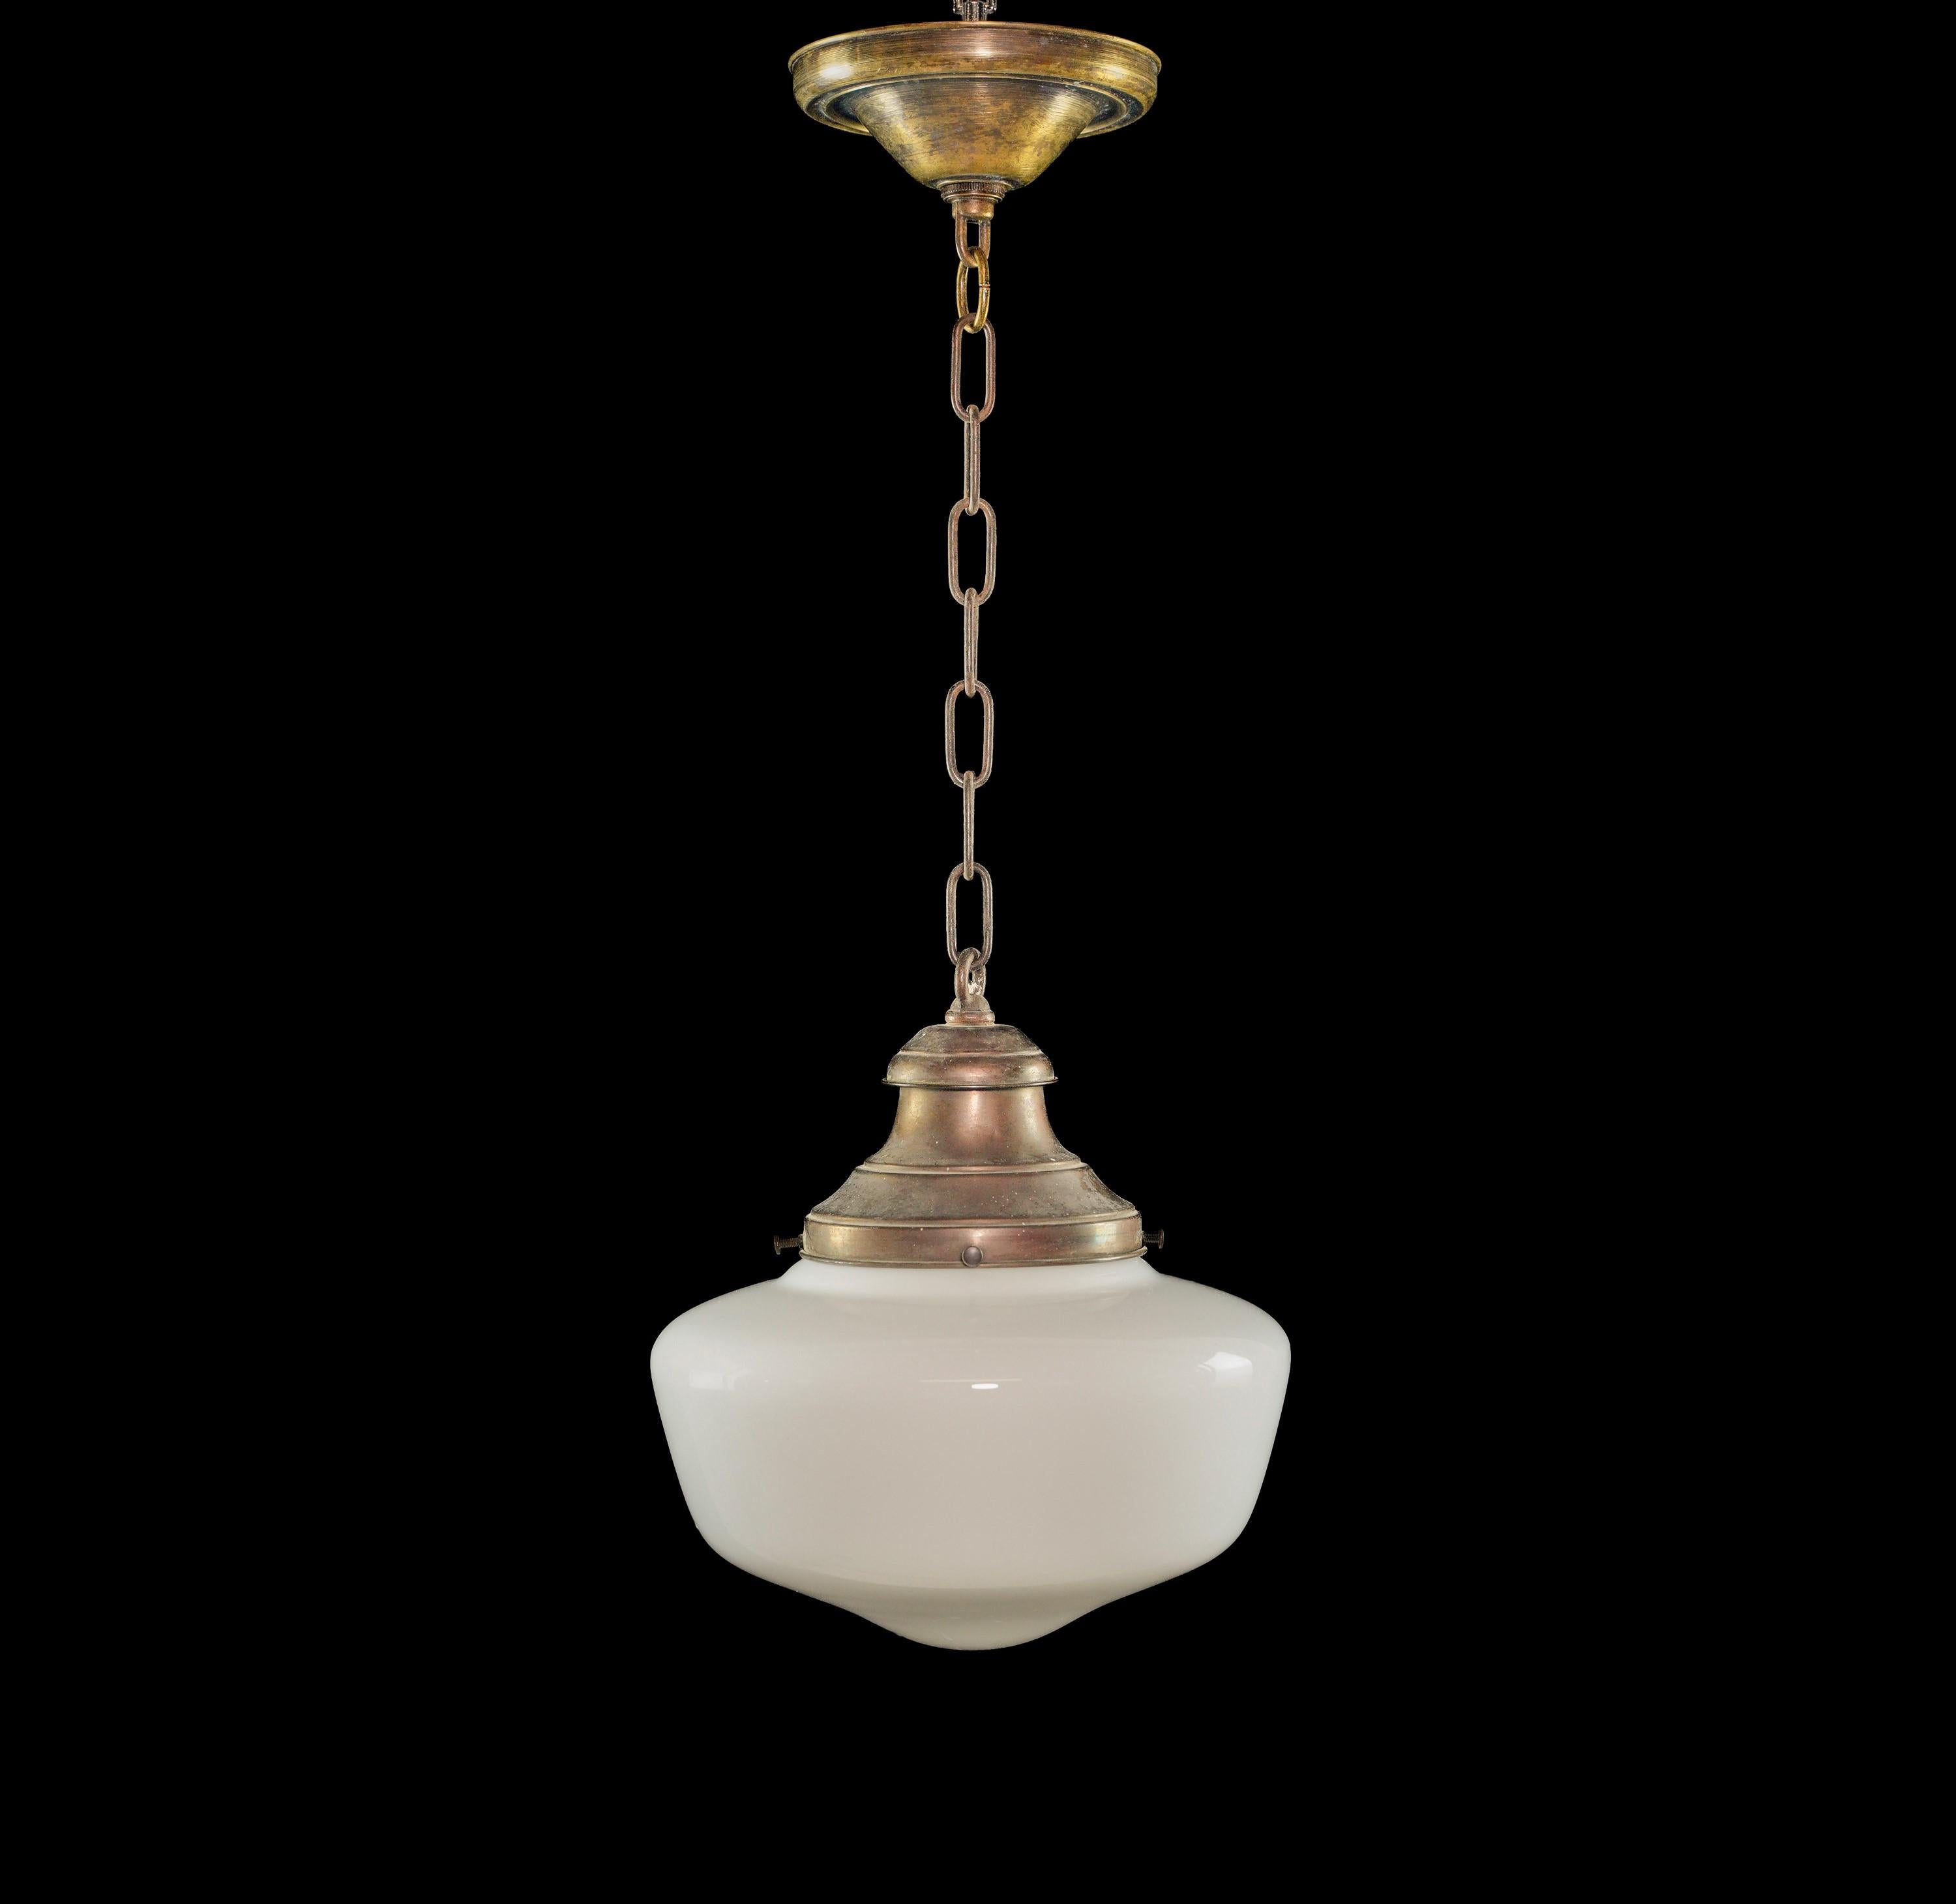 White schoolhouse glass pendant light with a brass chain fitter. Cleaned and restored. Please note, this item is located in our Scranton, PA location.